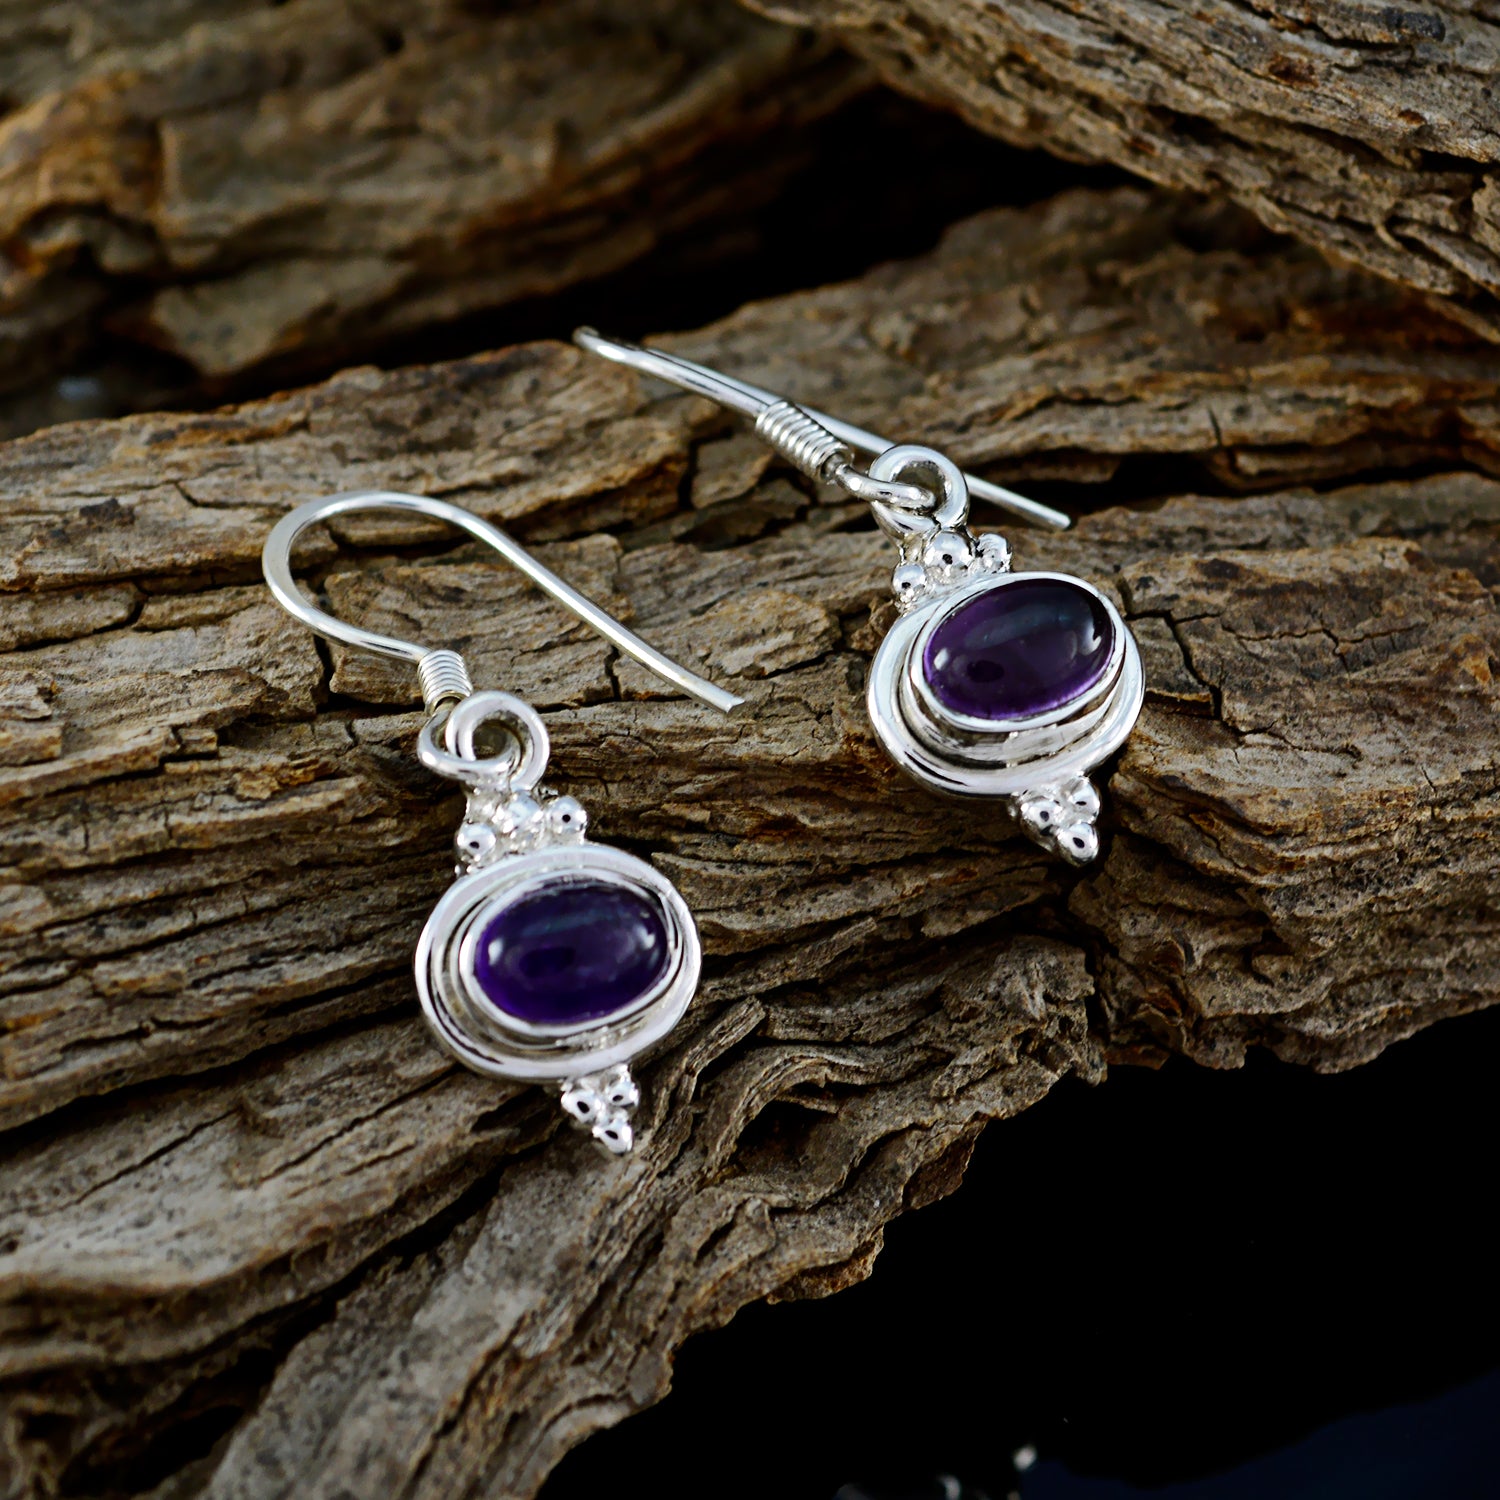 Riyo Natural Gemstone oval Cabochon Purple Amethyst Silver Earrings gift for engagement